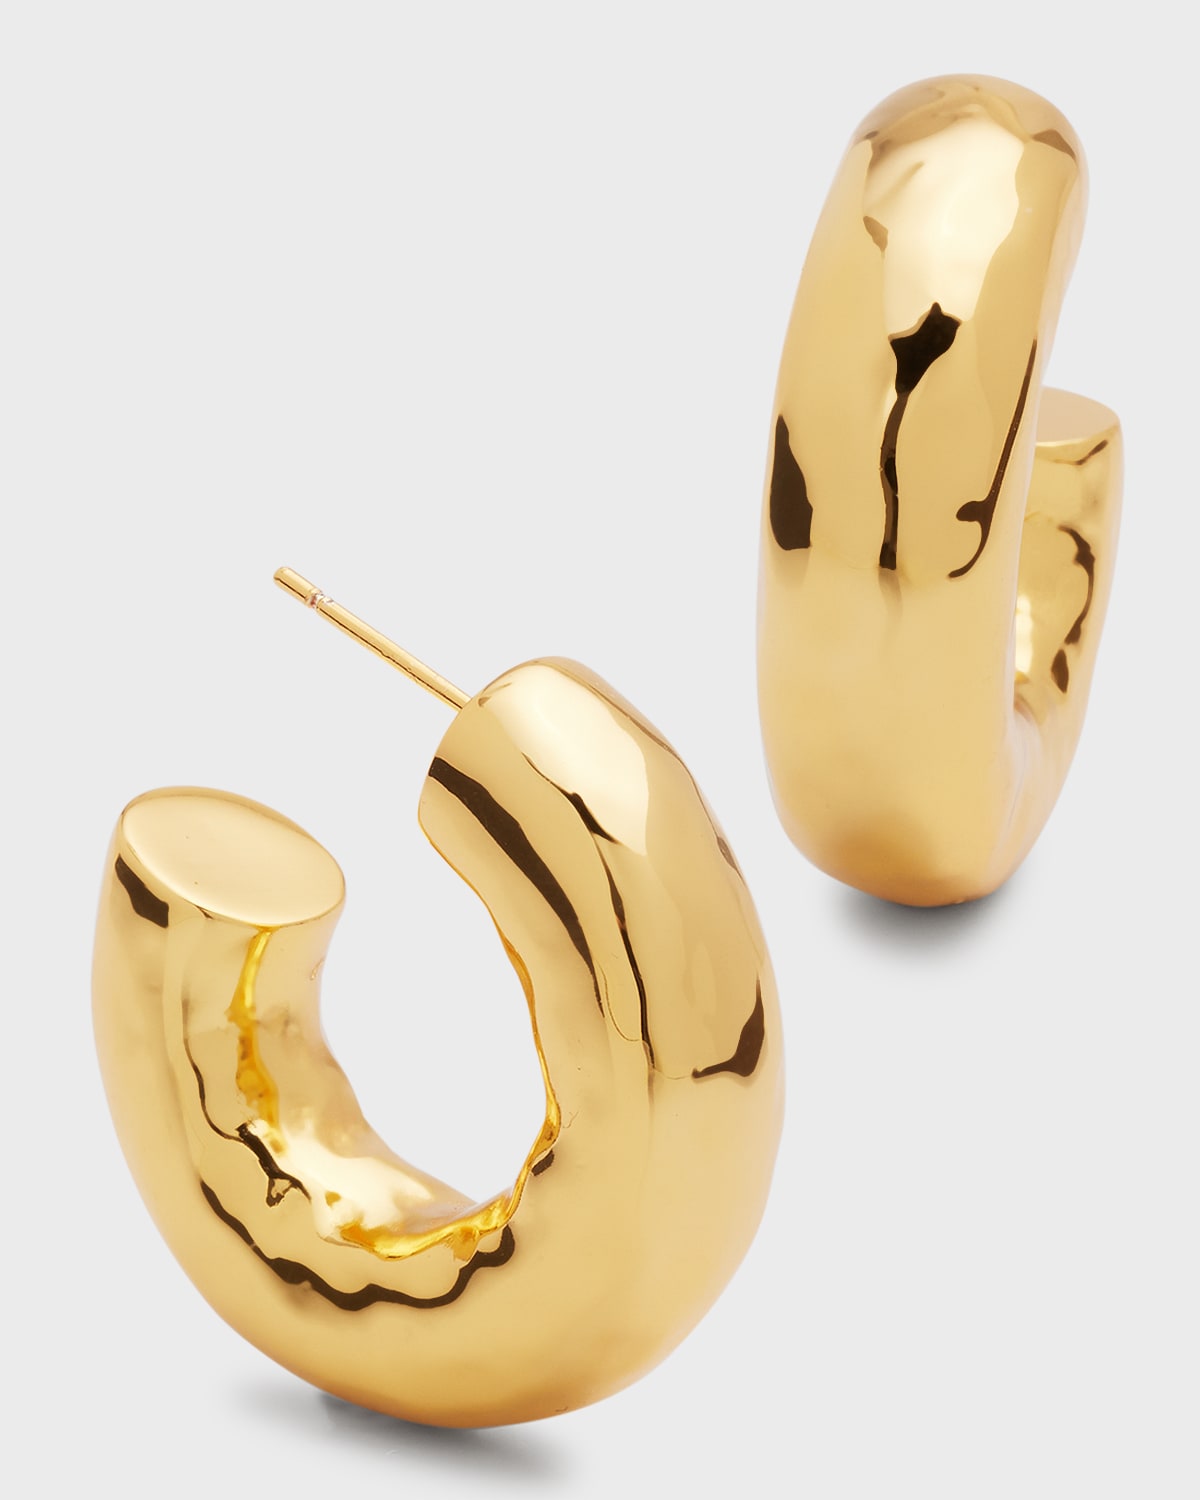 Hammered Gold Earrings | Neiman Marcus